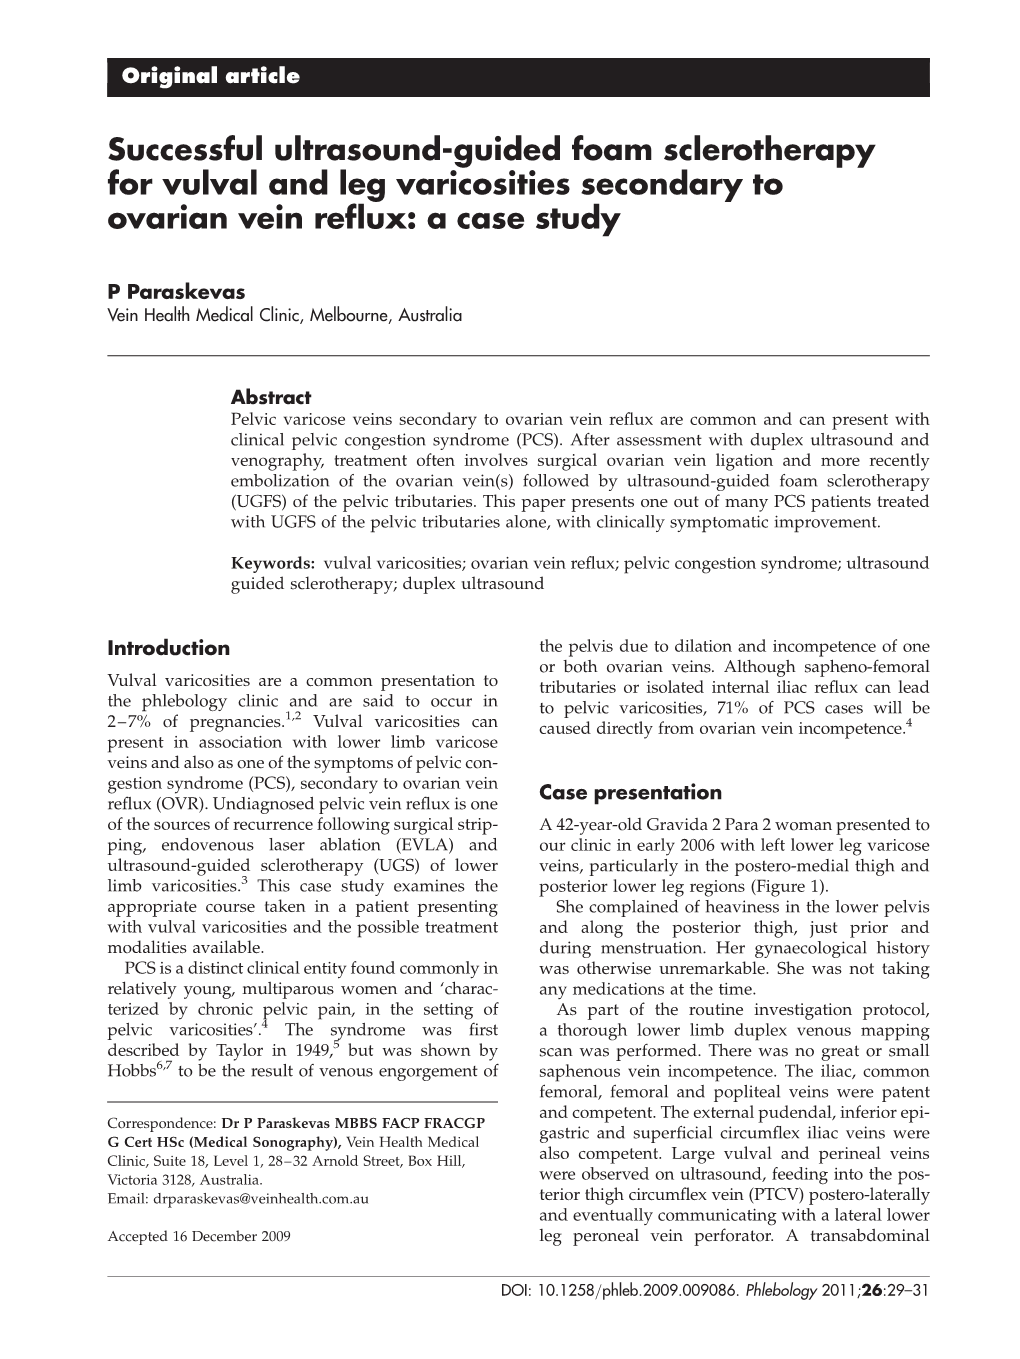 Successful Ultrasound-Guided Foam Sclerotherapy for Vulval and Leg Varicosities Secondary to Ovarian Vein Reﬂux: a Case Study